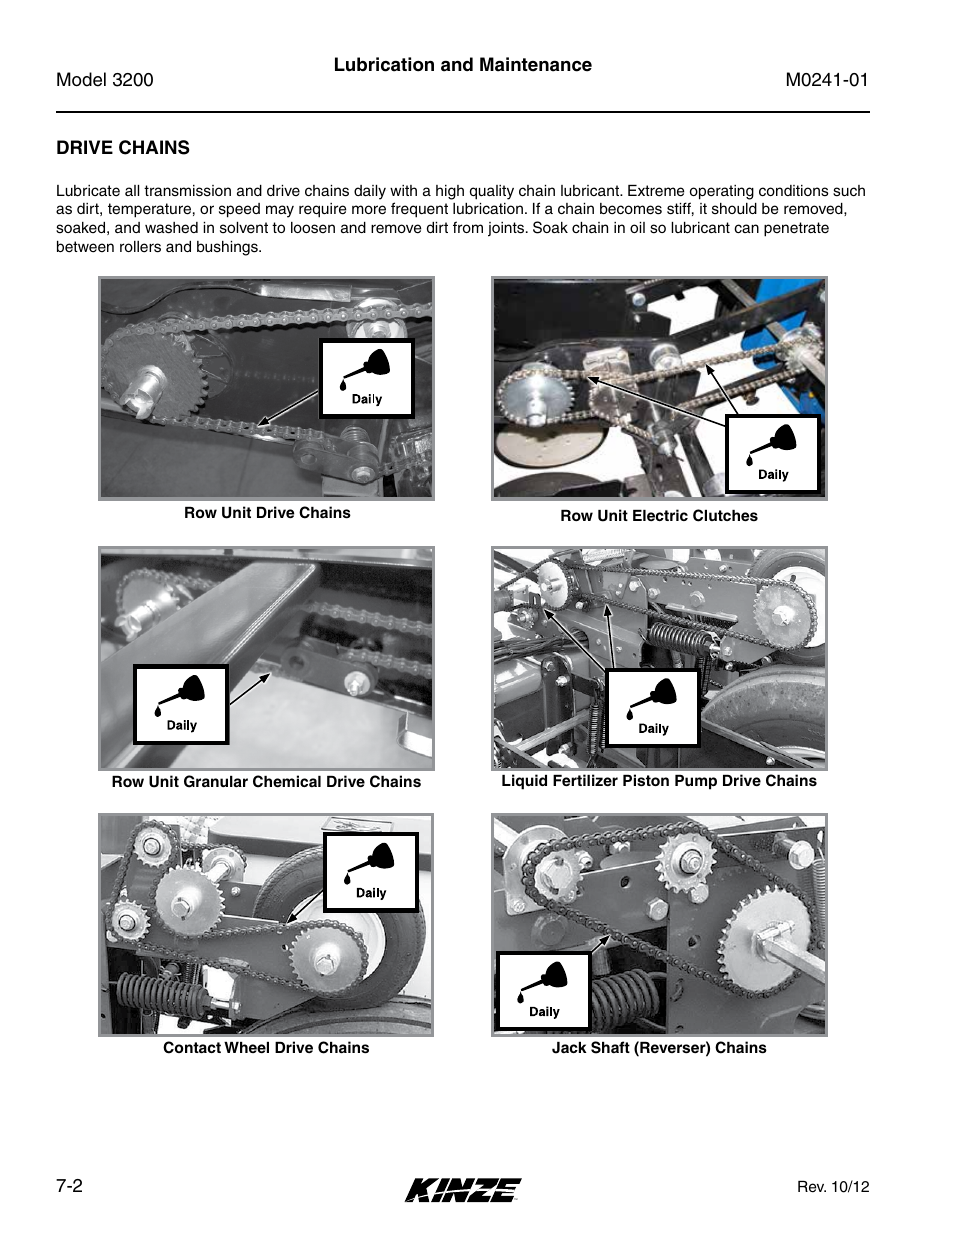 Drive chains, Drive chains -2 | Kinze 3200 Wing-Fold Planter Rev. 7/14 User Manual | Page 142 / 192